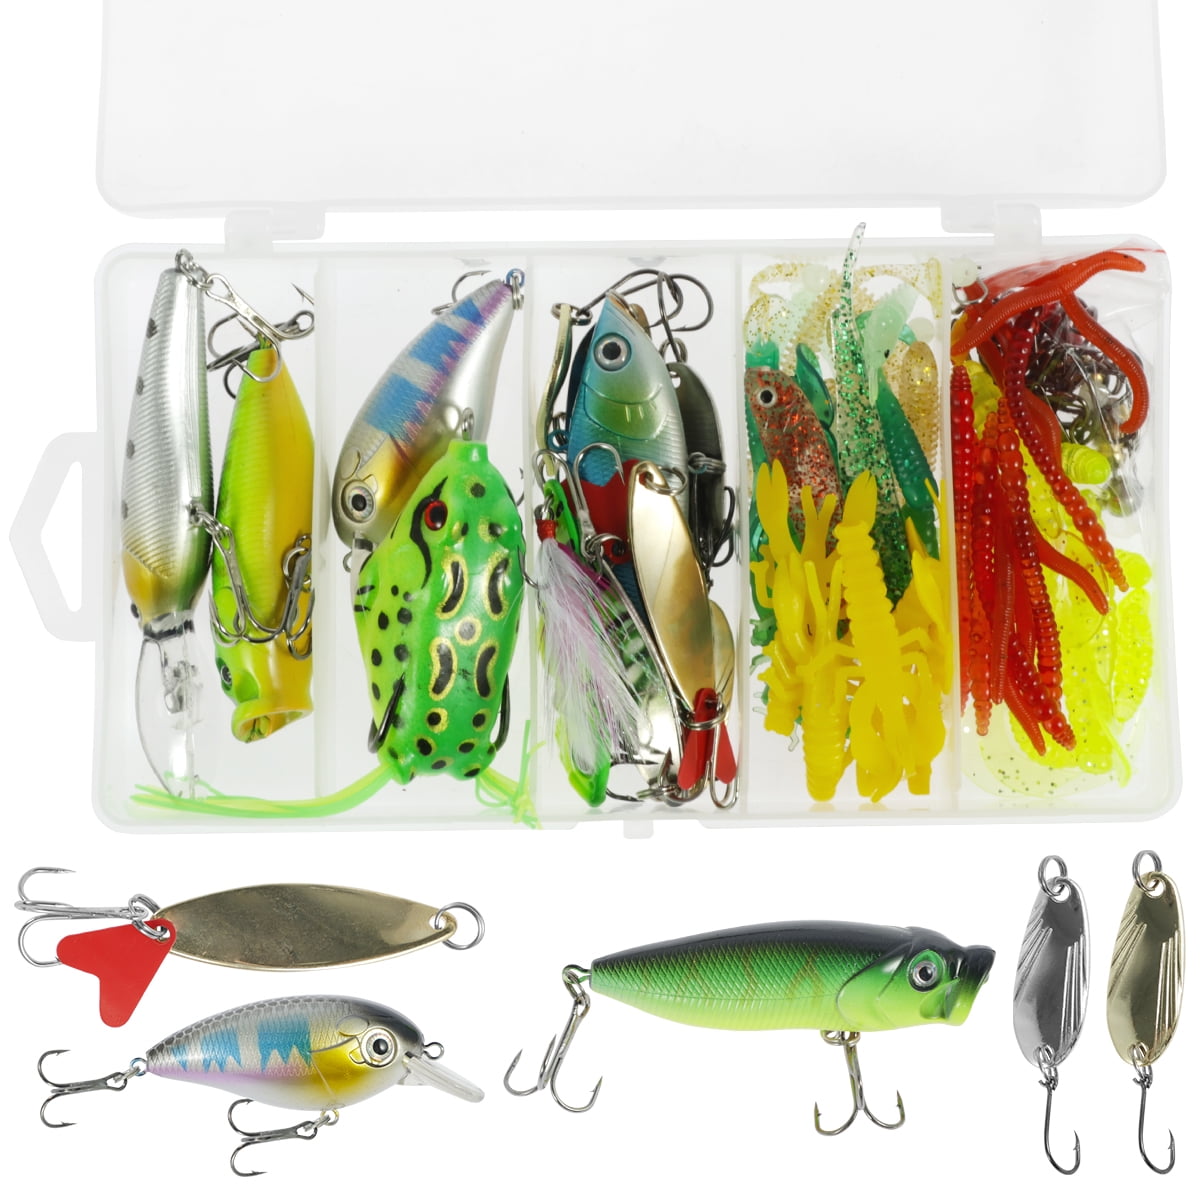  Customer reviews: Dynamic Lures Trout Fishing Lure, Multiple  BB Chamber Inside, (2) - Size 10 Treble Hooks, for Bass, Trout, Walleye,  Carp, Count 1